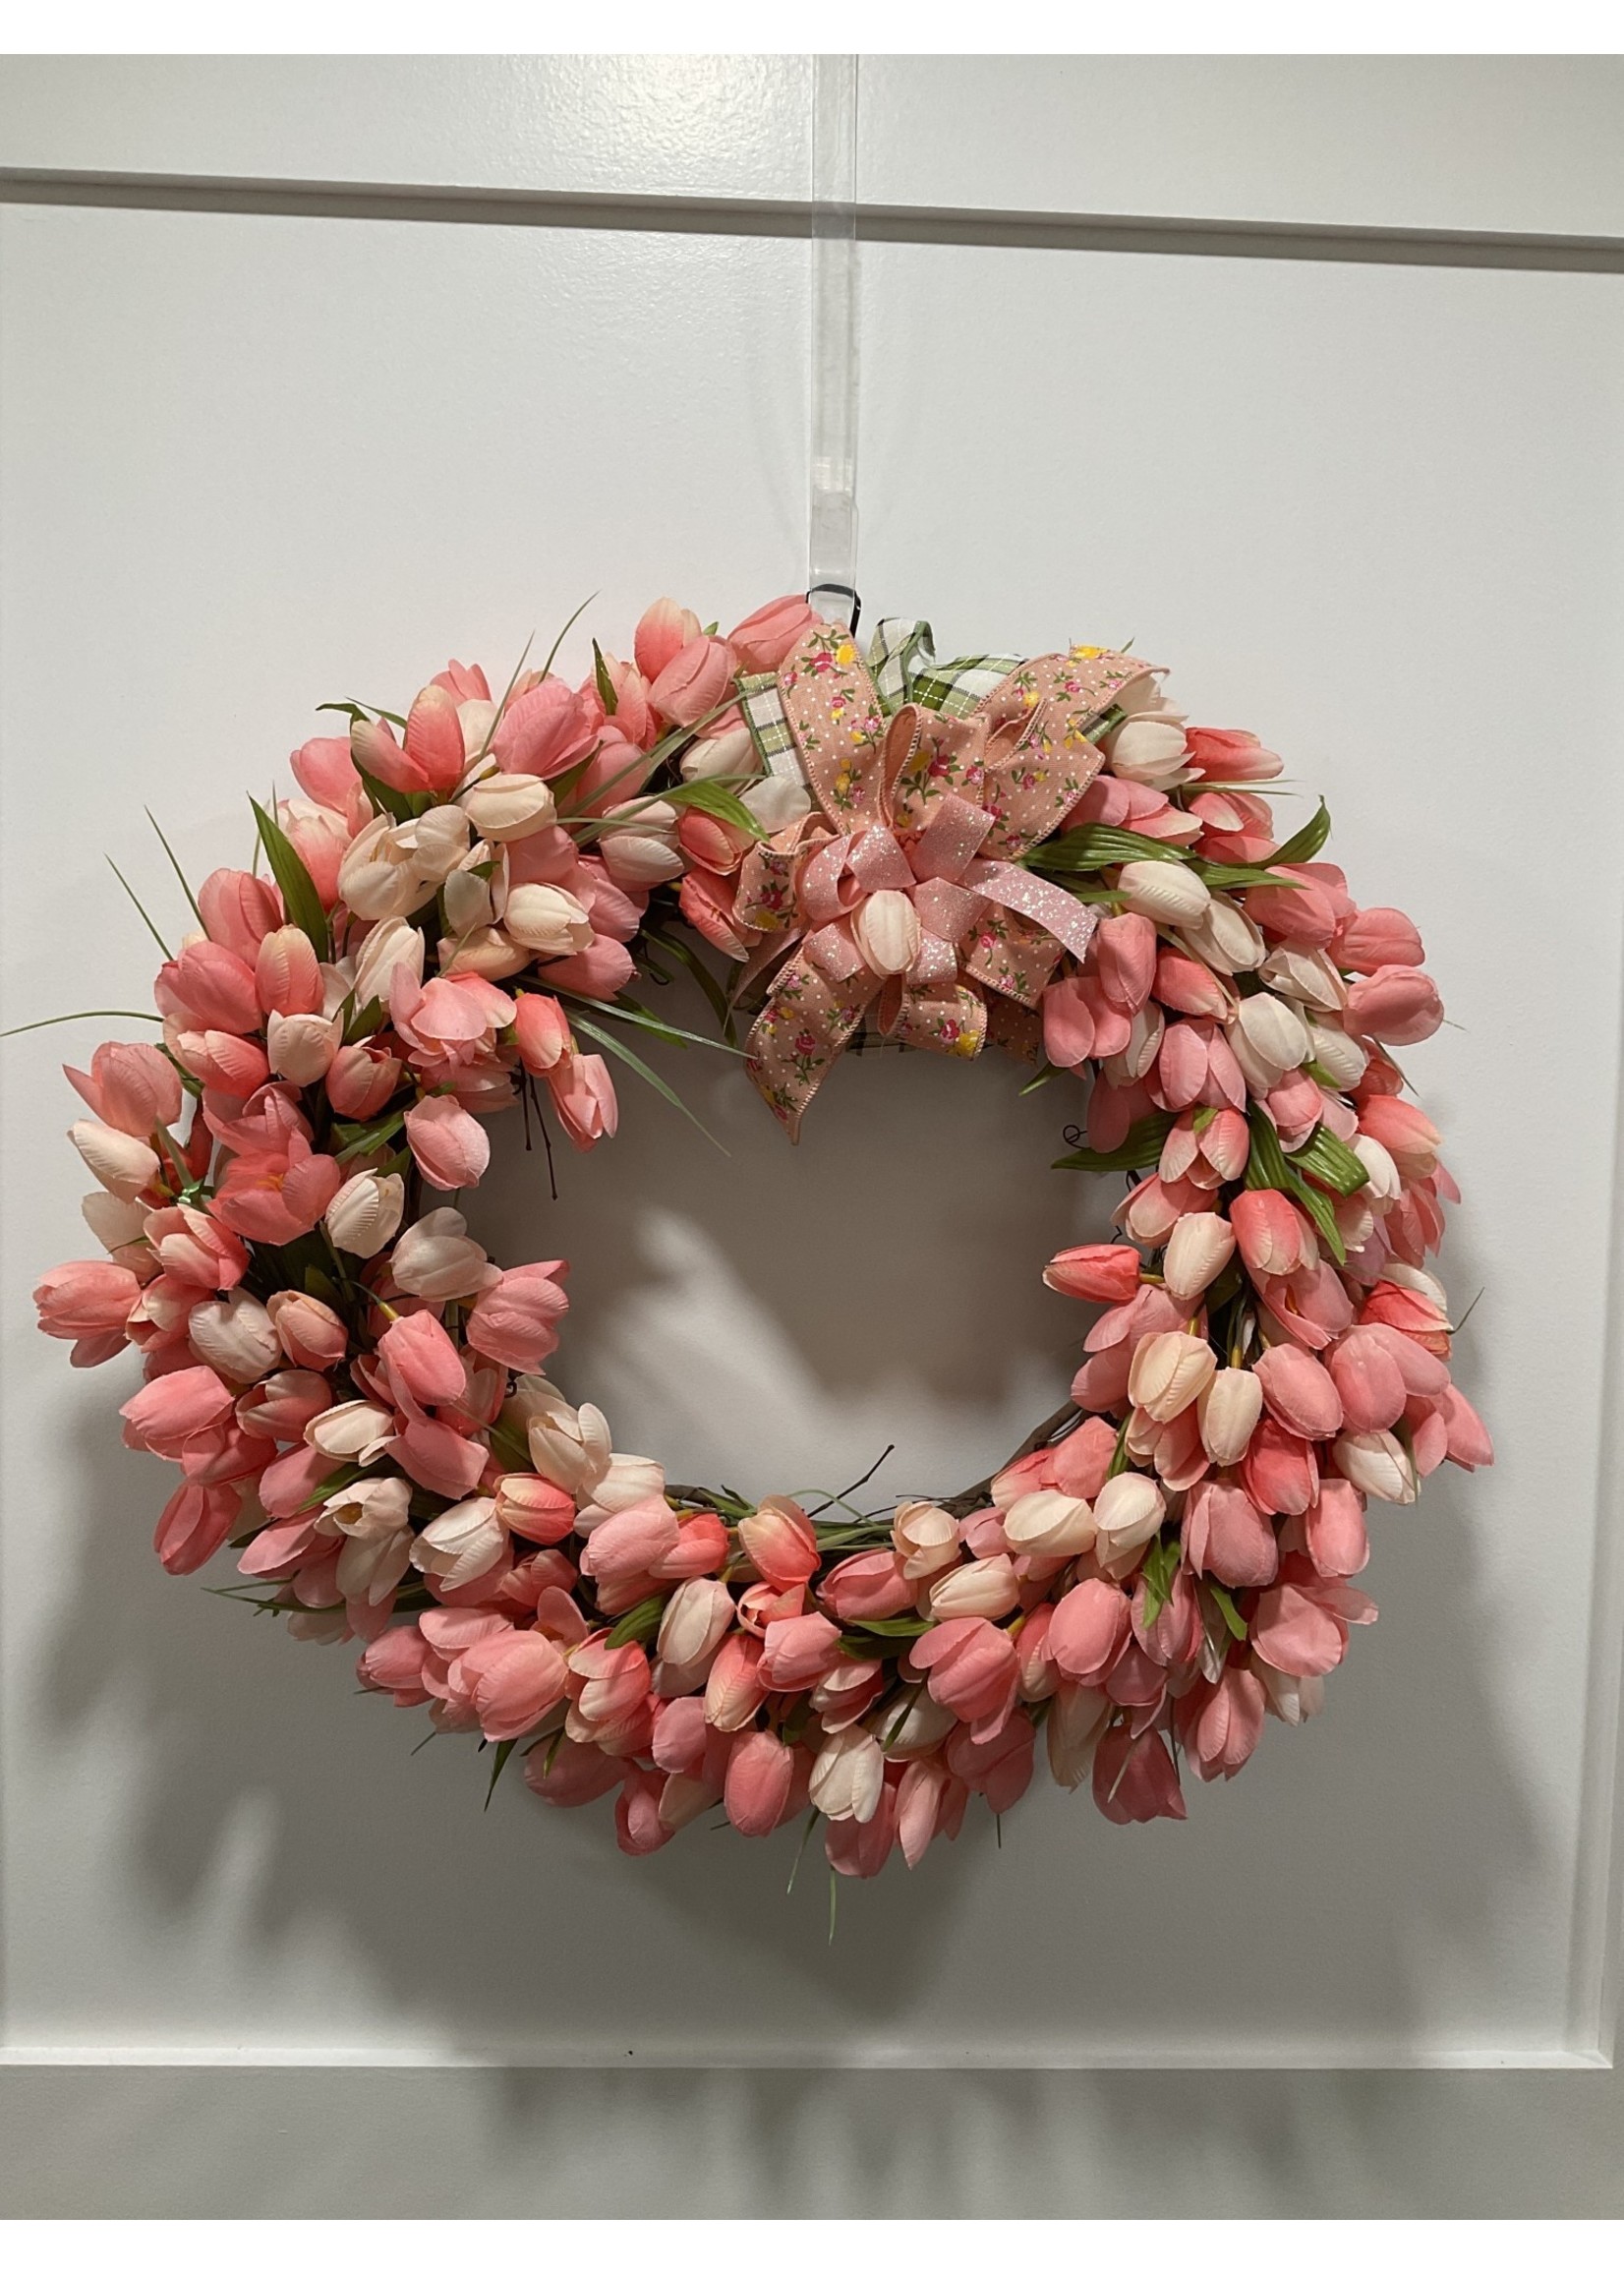 My New Favorite Thing Wreath Grapevine 18 in-Pink Tulips w/Pink and Green Bow